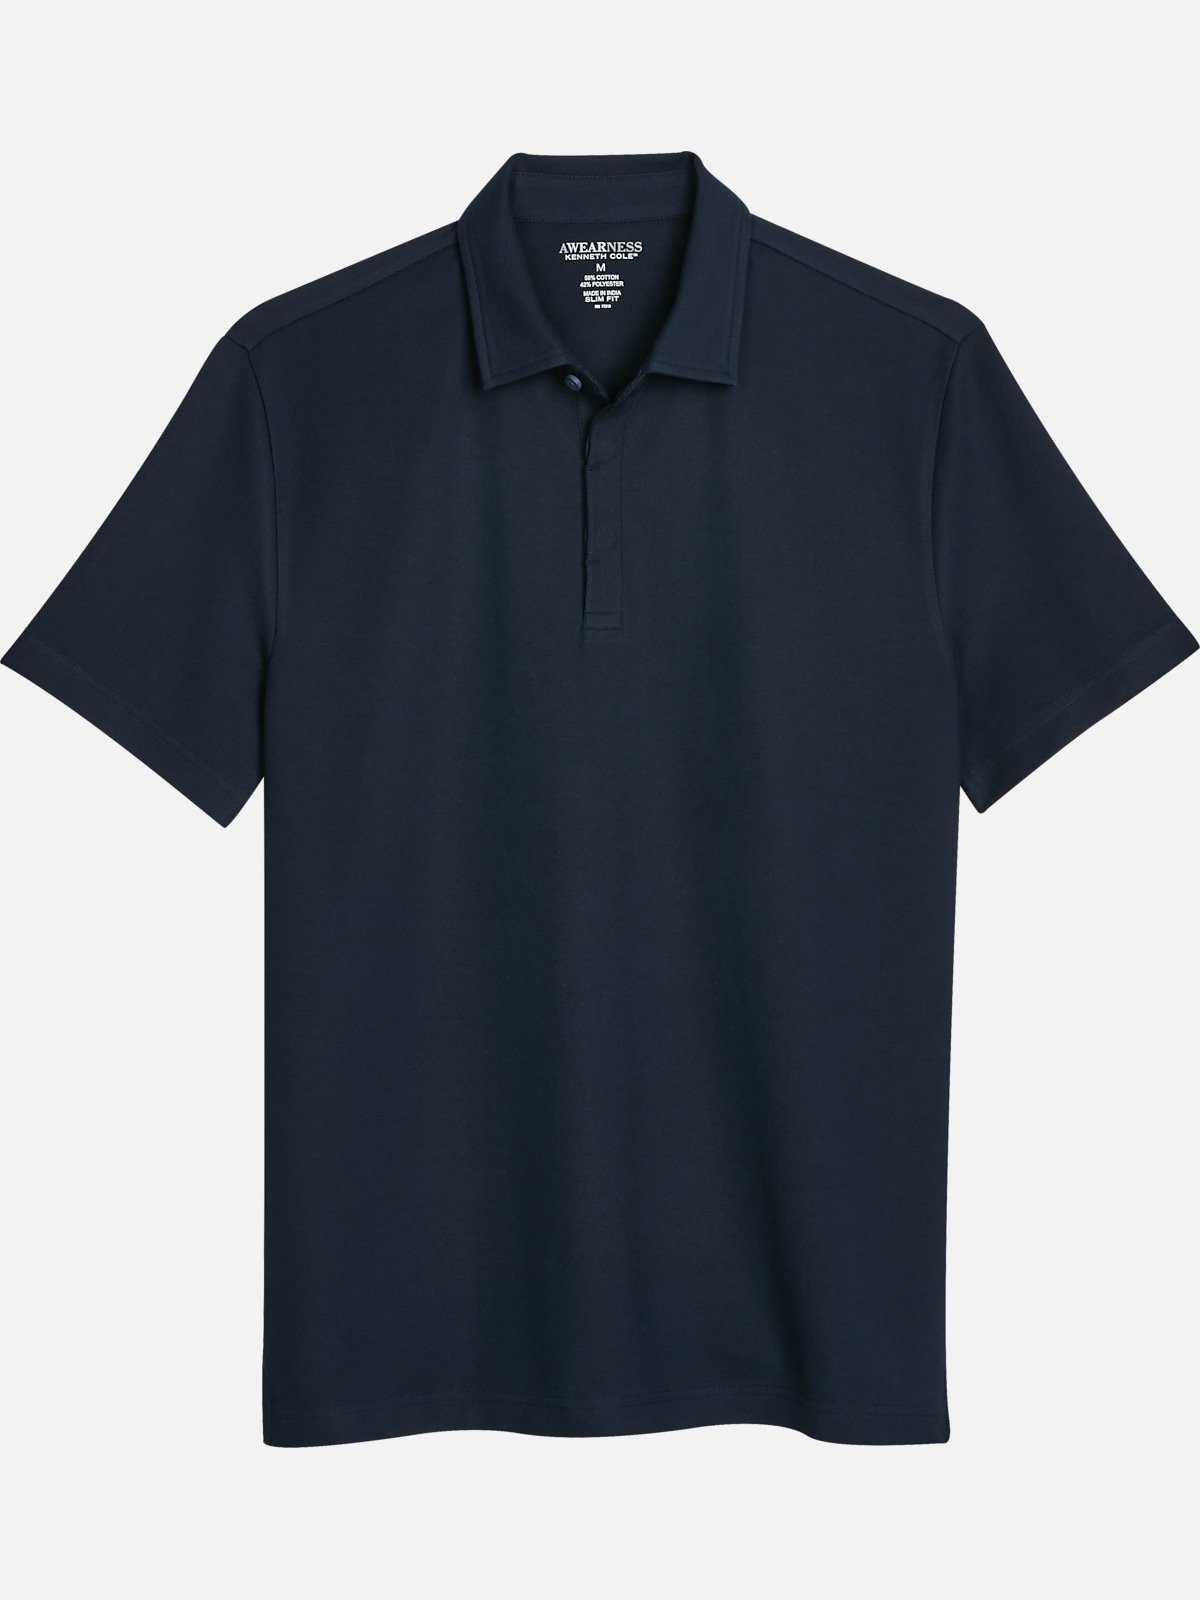 Awearness Kenneth Cole Slim Fit Pique Polo | Casual Shirts| Men's Wearhouse